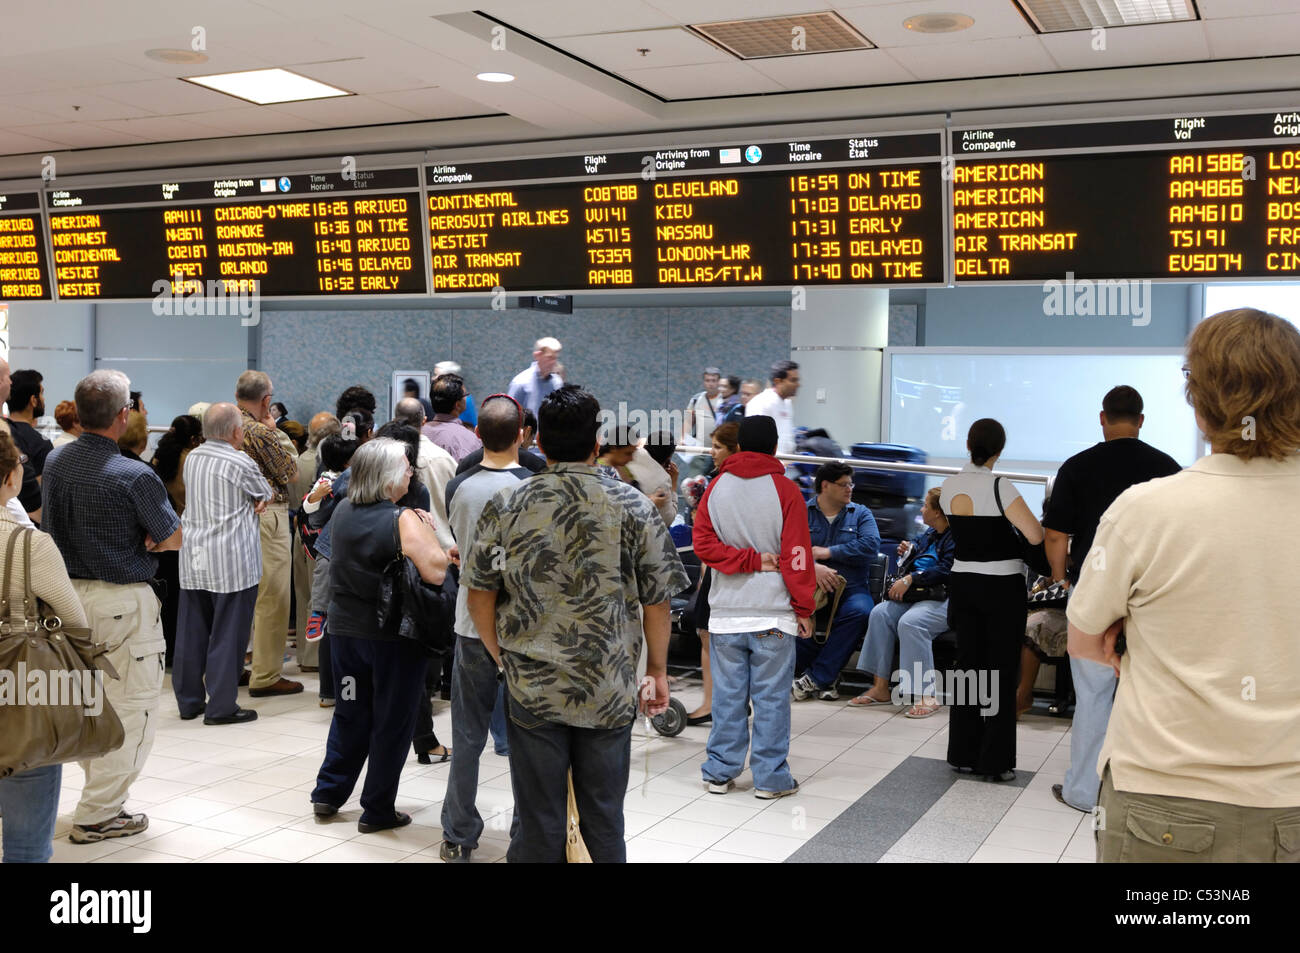 People waiting at arrivals hall of Toronto Pearson International airport. Ontario, Canada 2009. Stock Photo